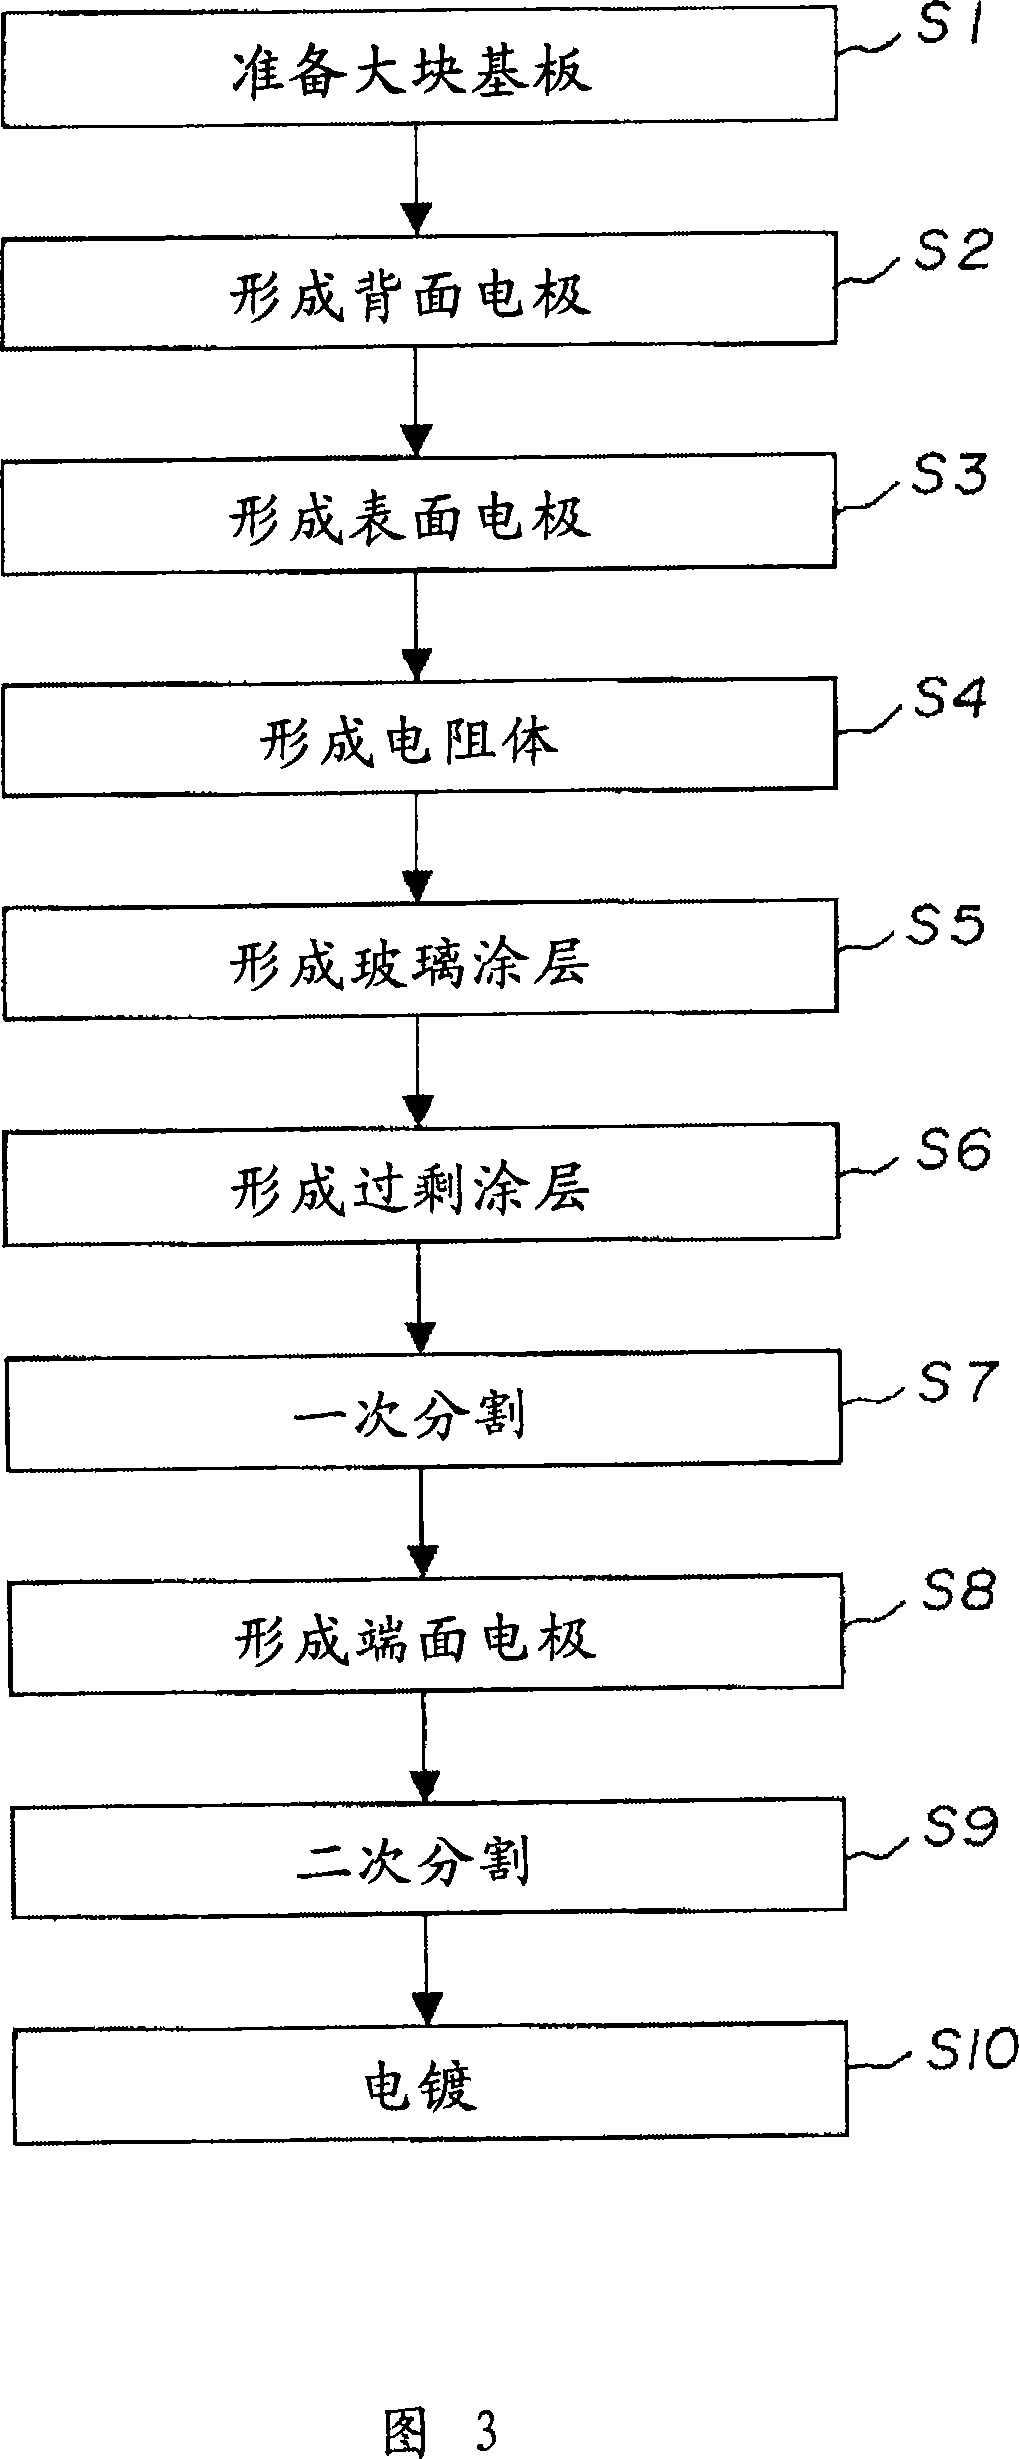 Chip resistor and its manufacturing method